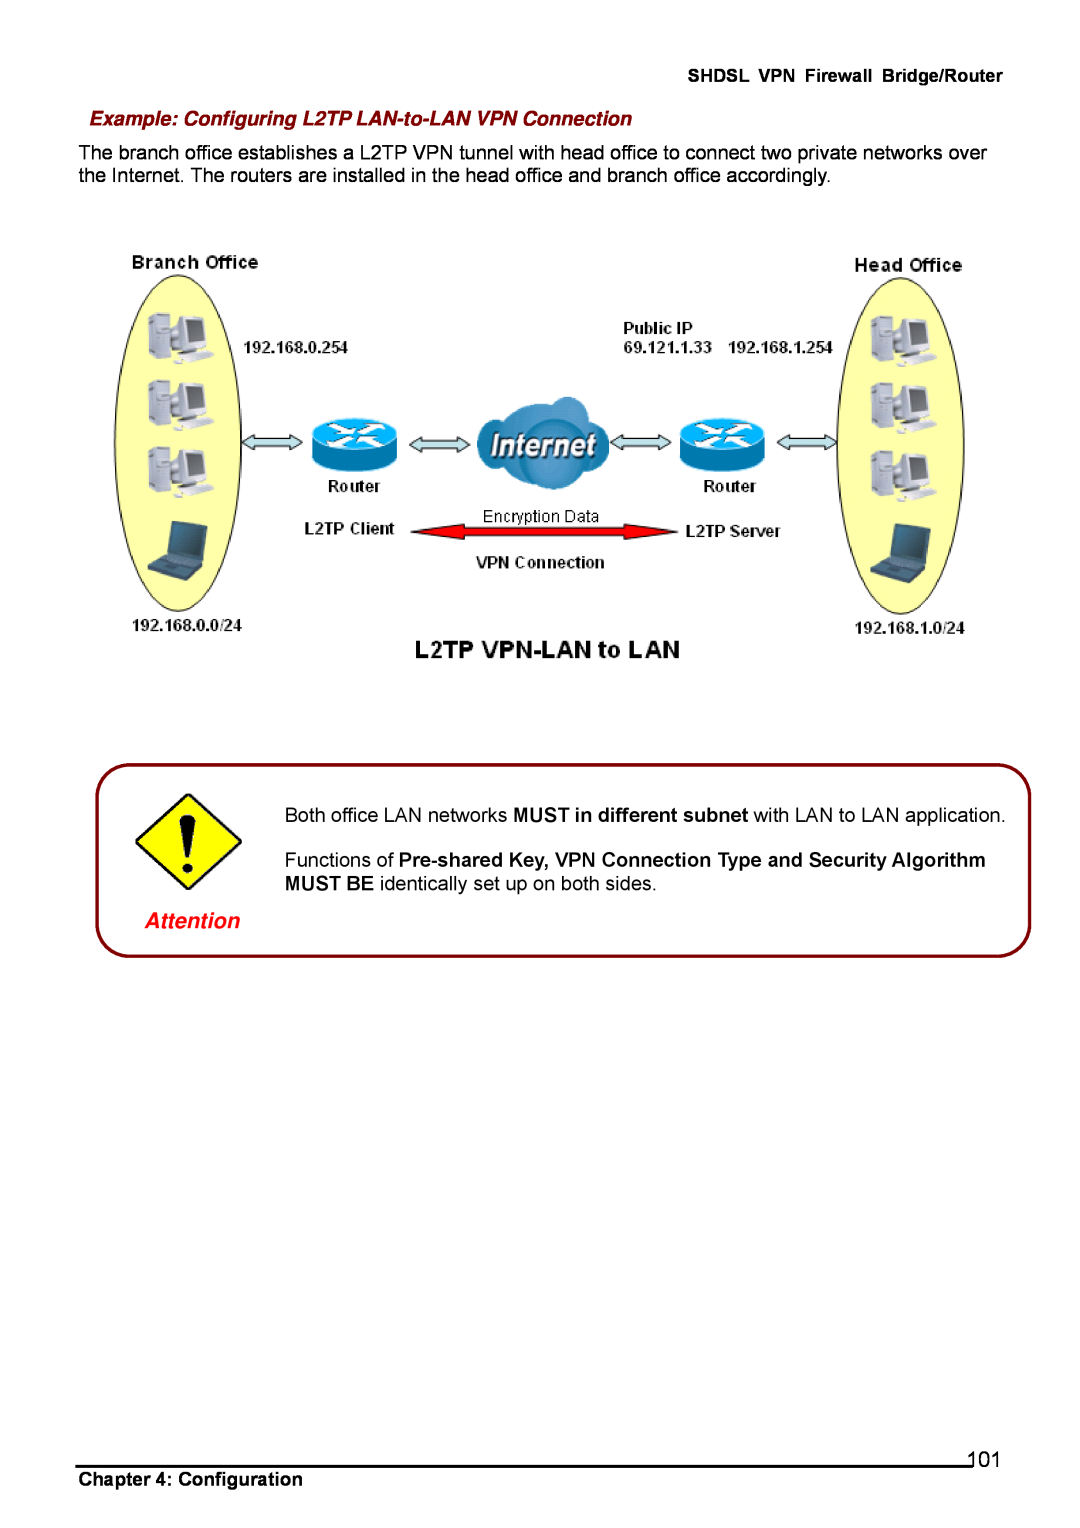 Billion Electric Company 8501 user manual Example Configuring L2TP LAN-to-LAN VPN Connection, Configuration 